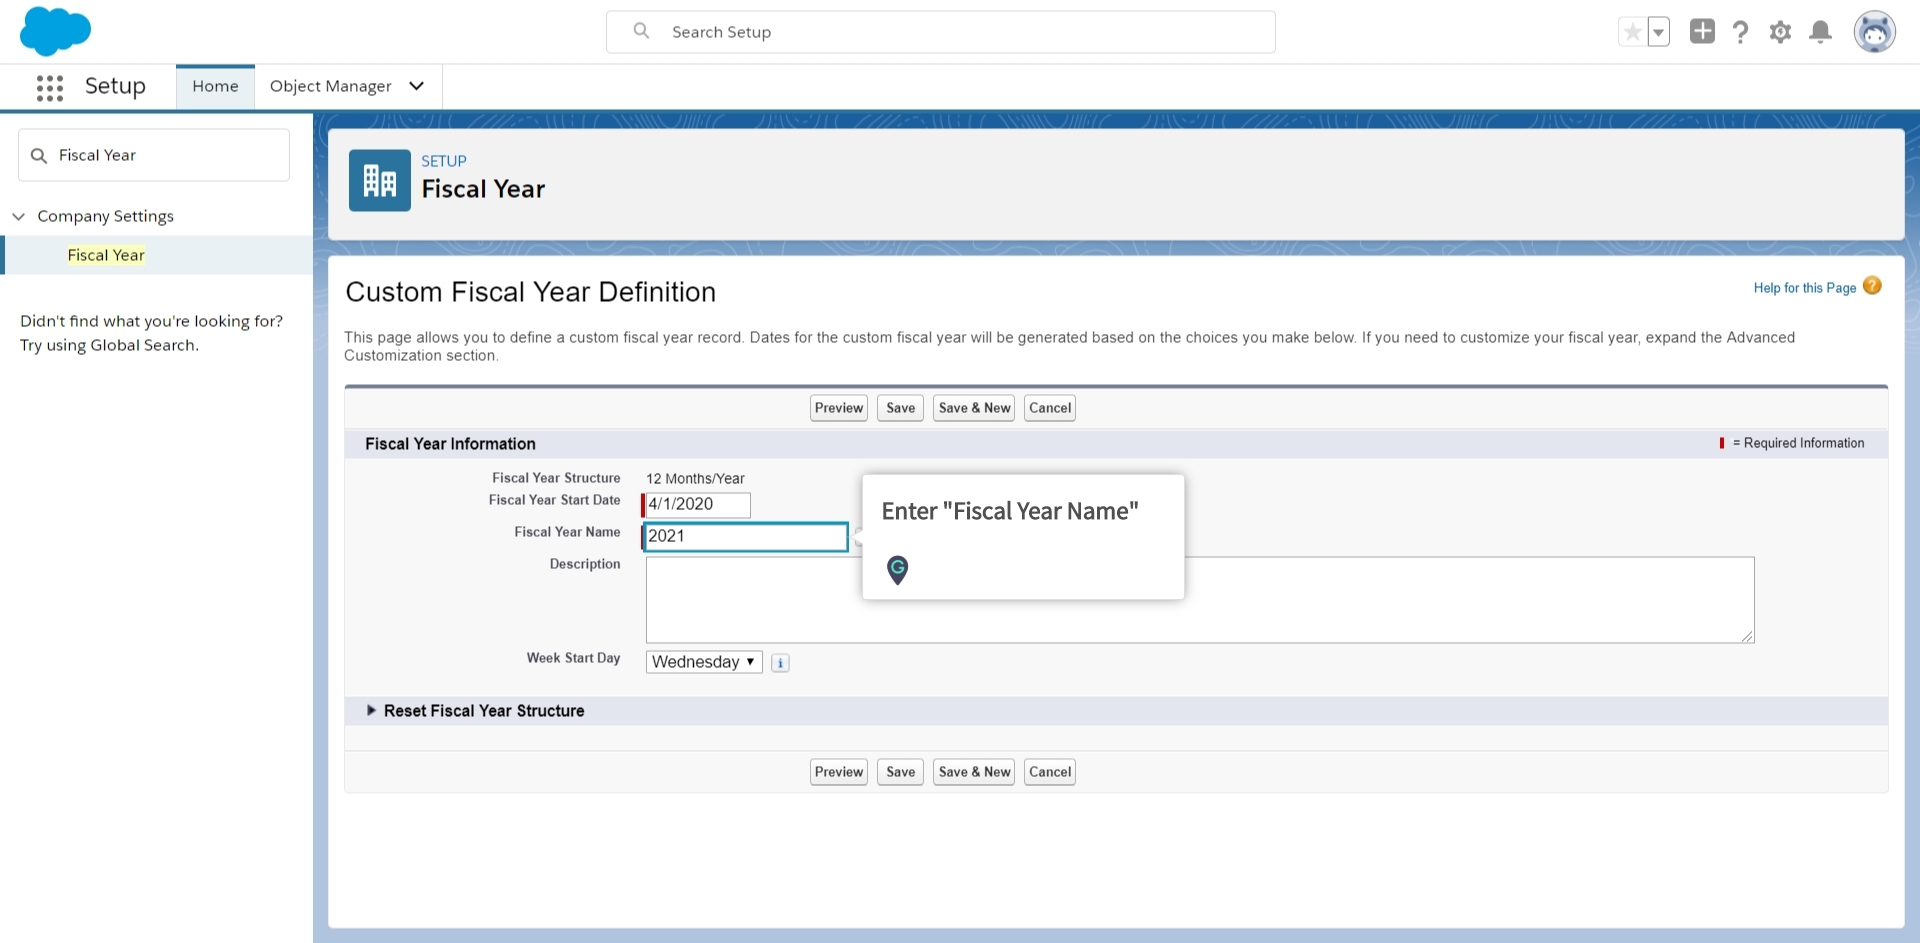 How to set custom Fiscal Year for the organization in Salesforce